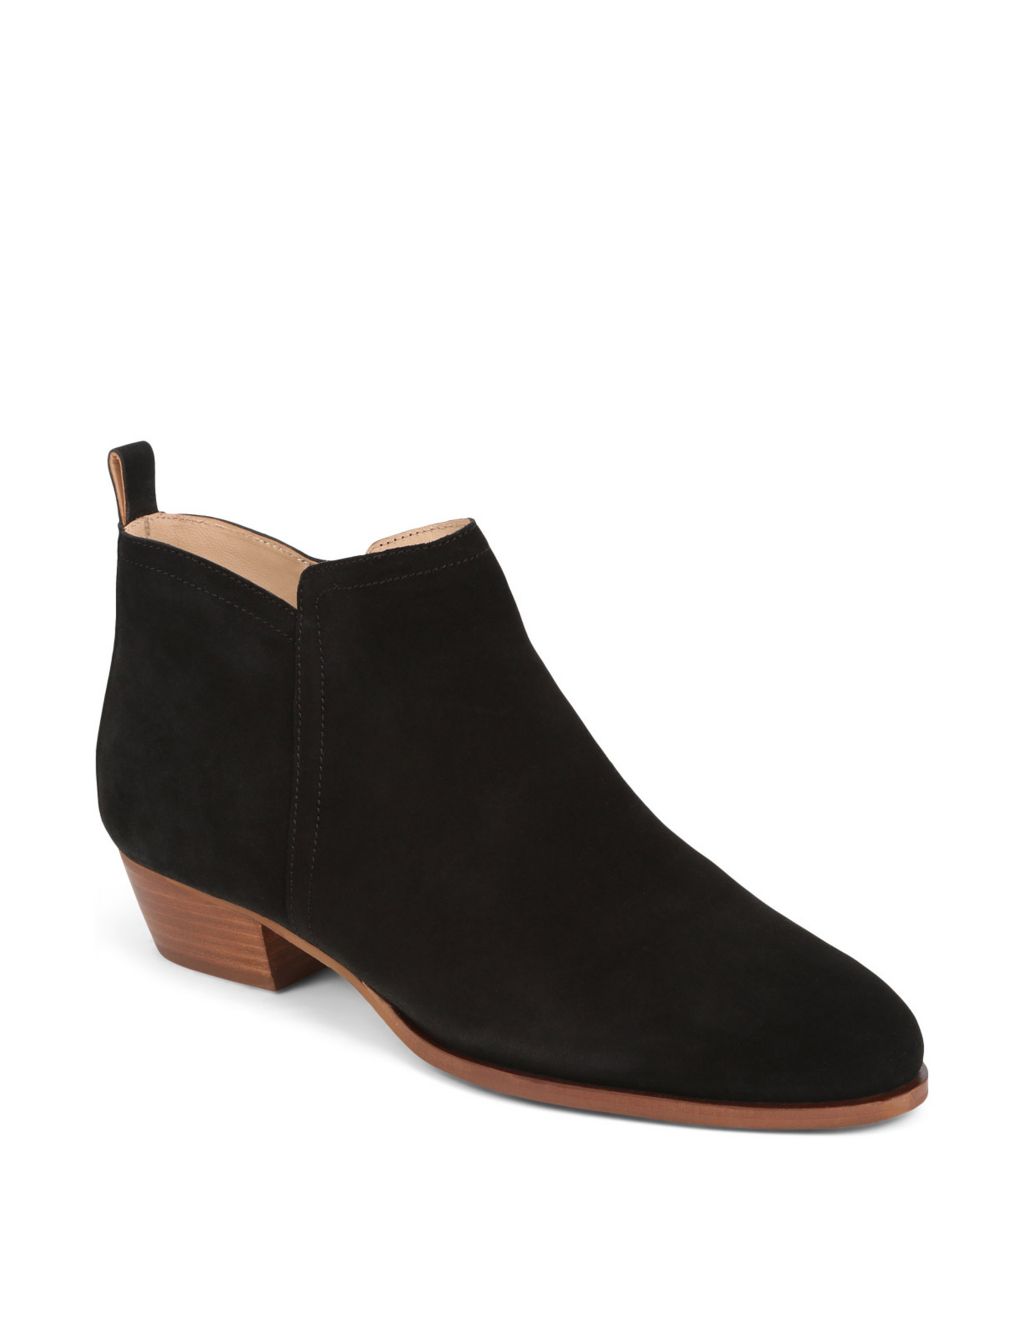 Suede Block Heel Round Toe Ankle Boots 6 of 7